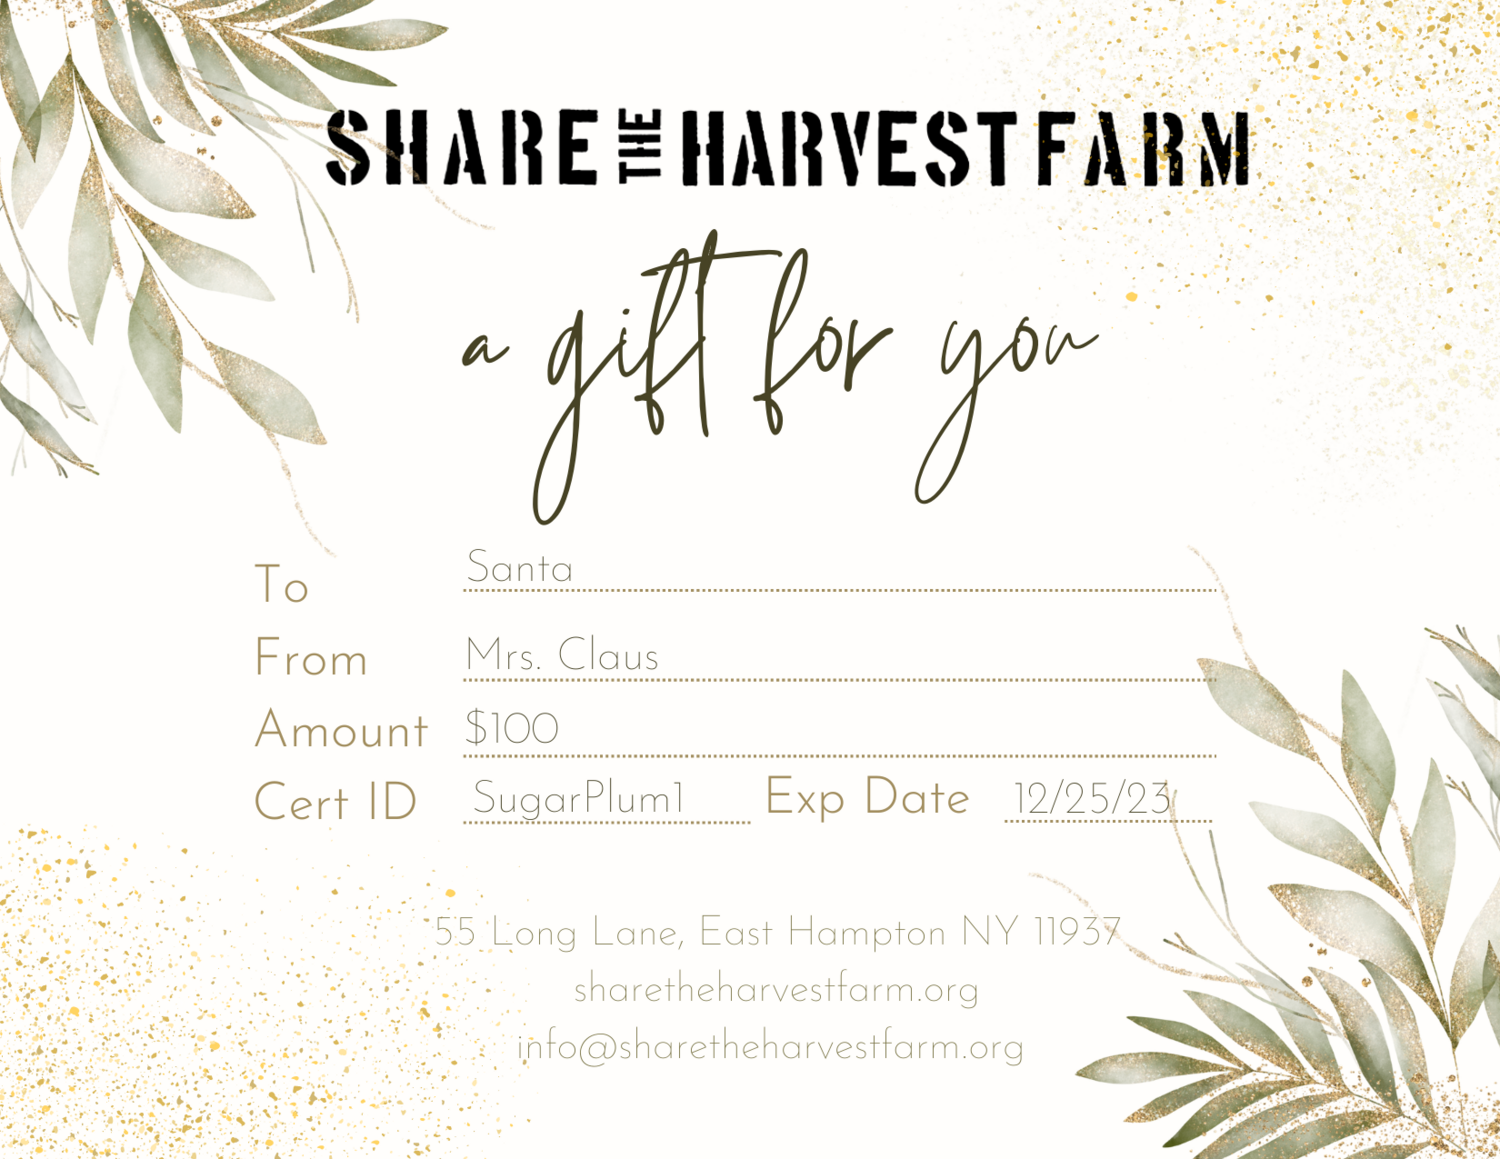 Share the Harvest Gift Certificate $150.00